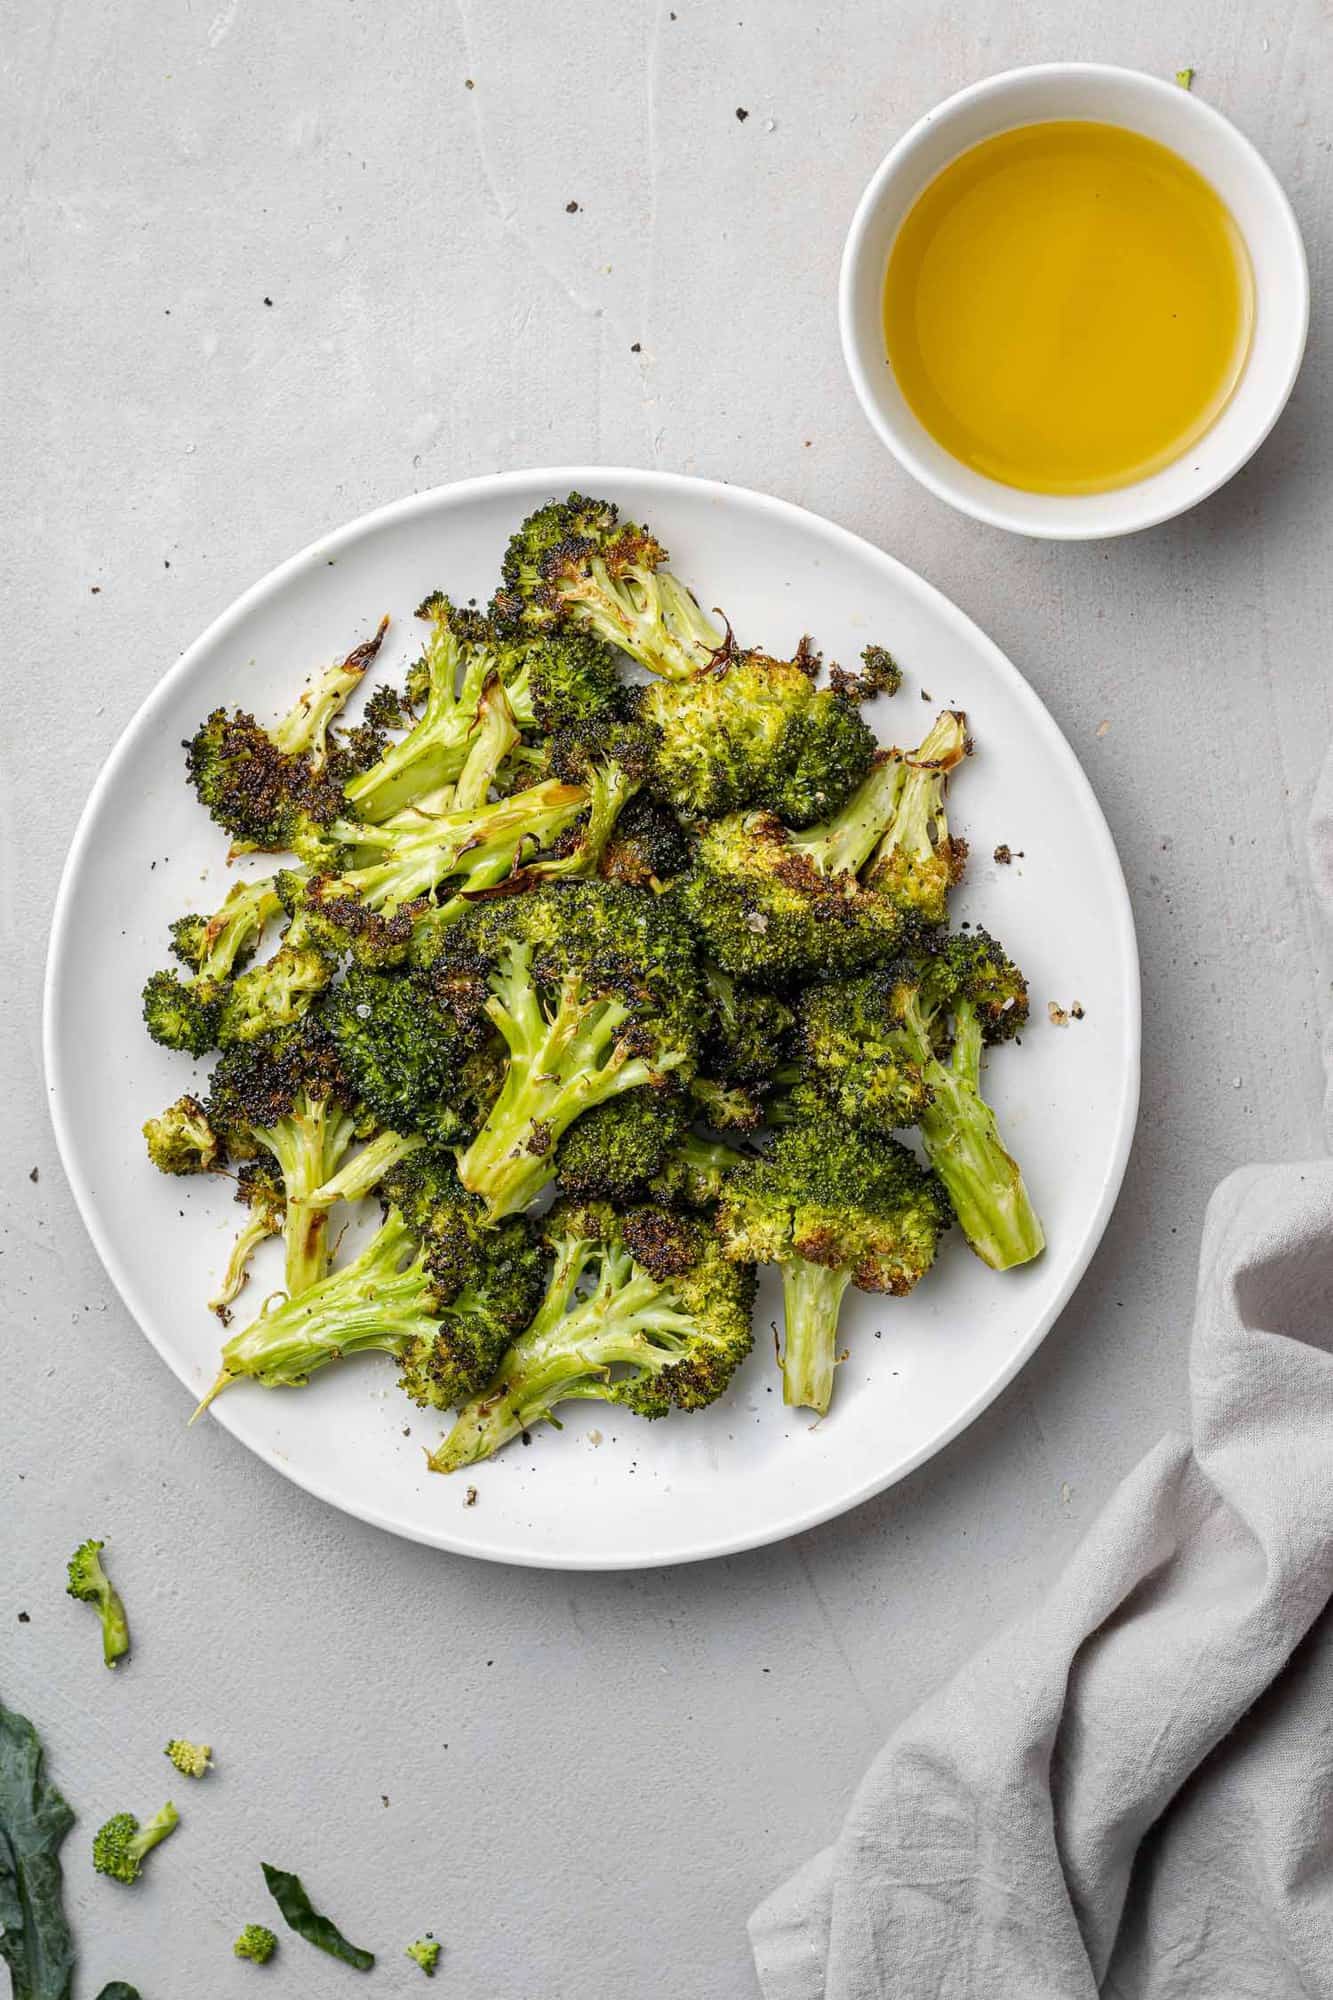 Roasted broccoli in a bowl, with a small bowl of olive oil nearby.